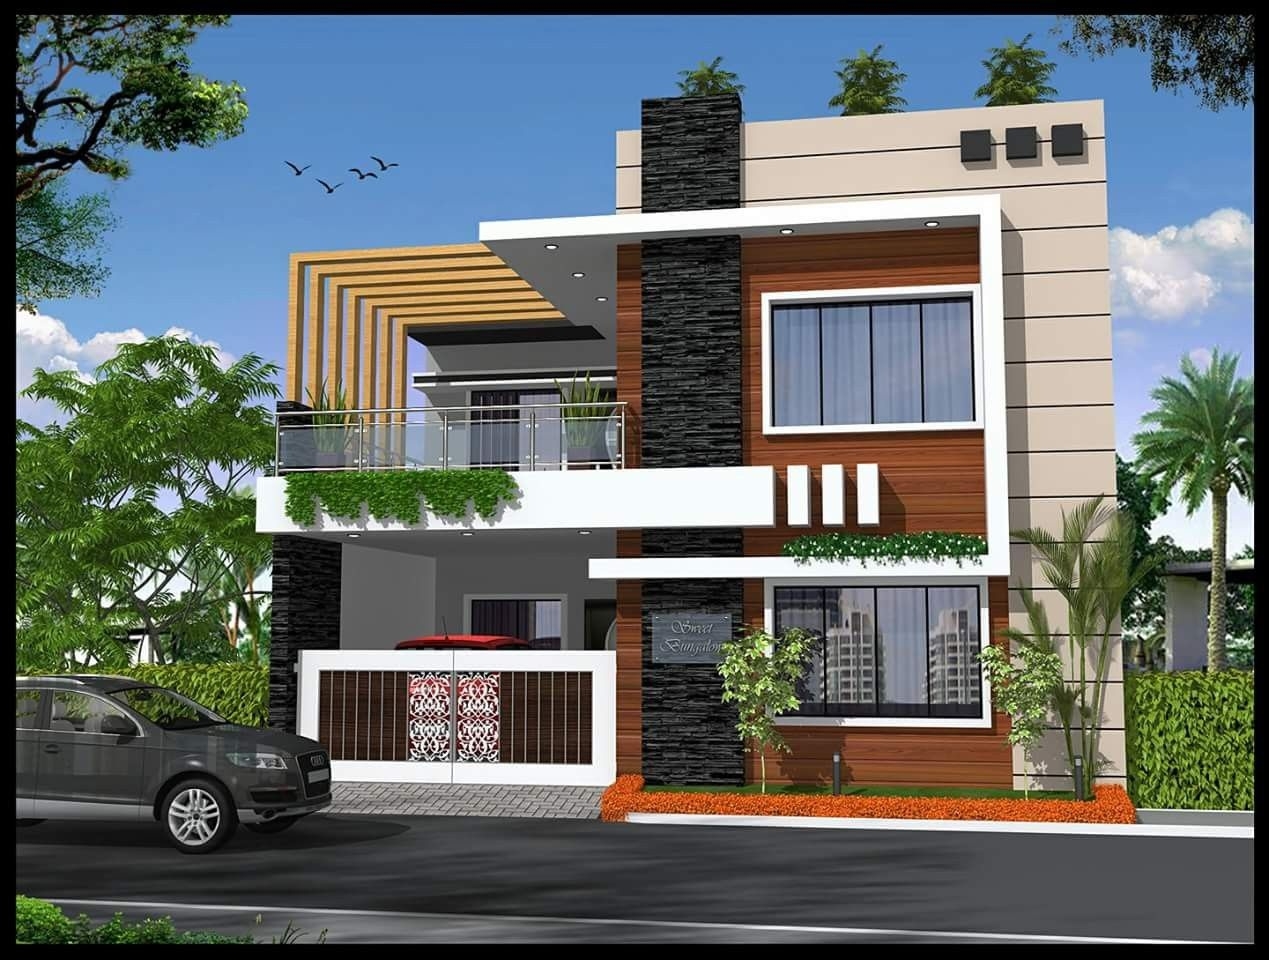 Awesome homeku: 2nd floor indian house front elevation designs photos 2020 with ground floor house elevation design